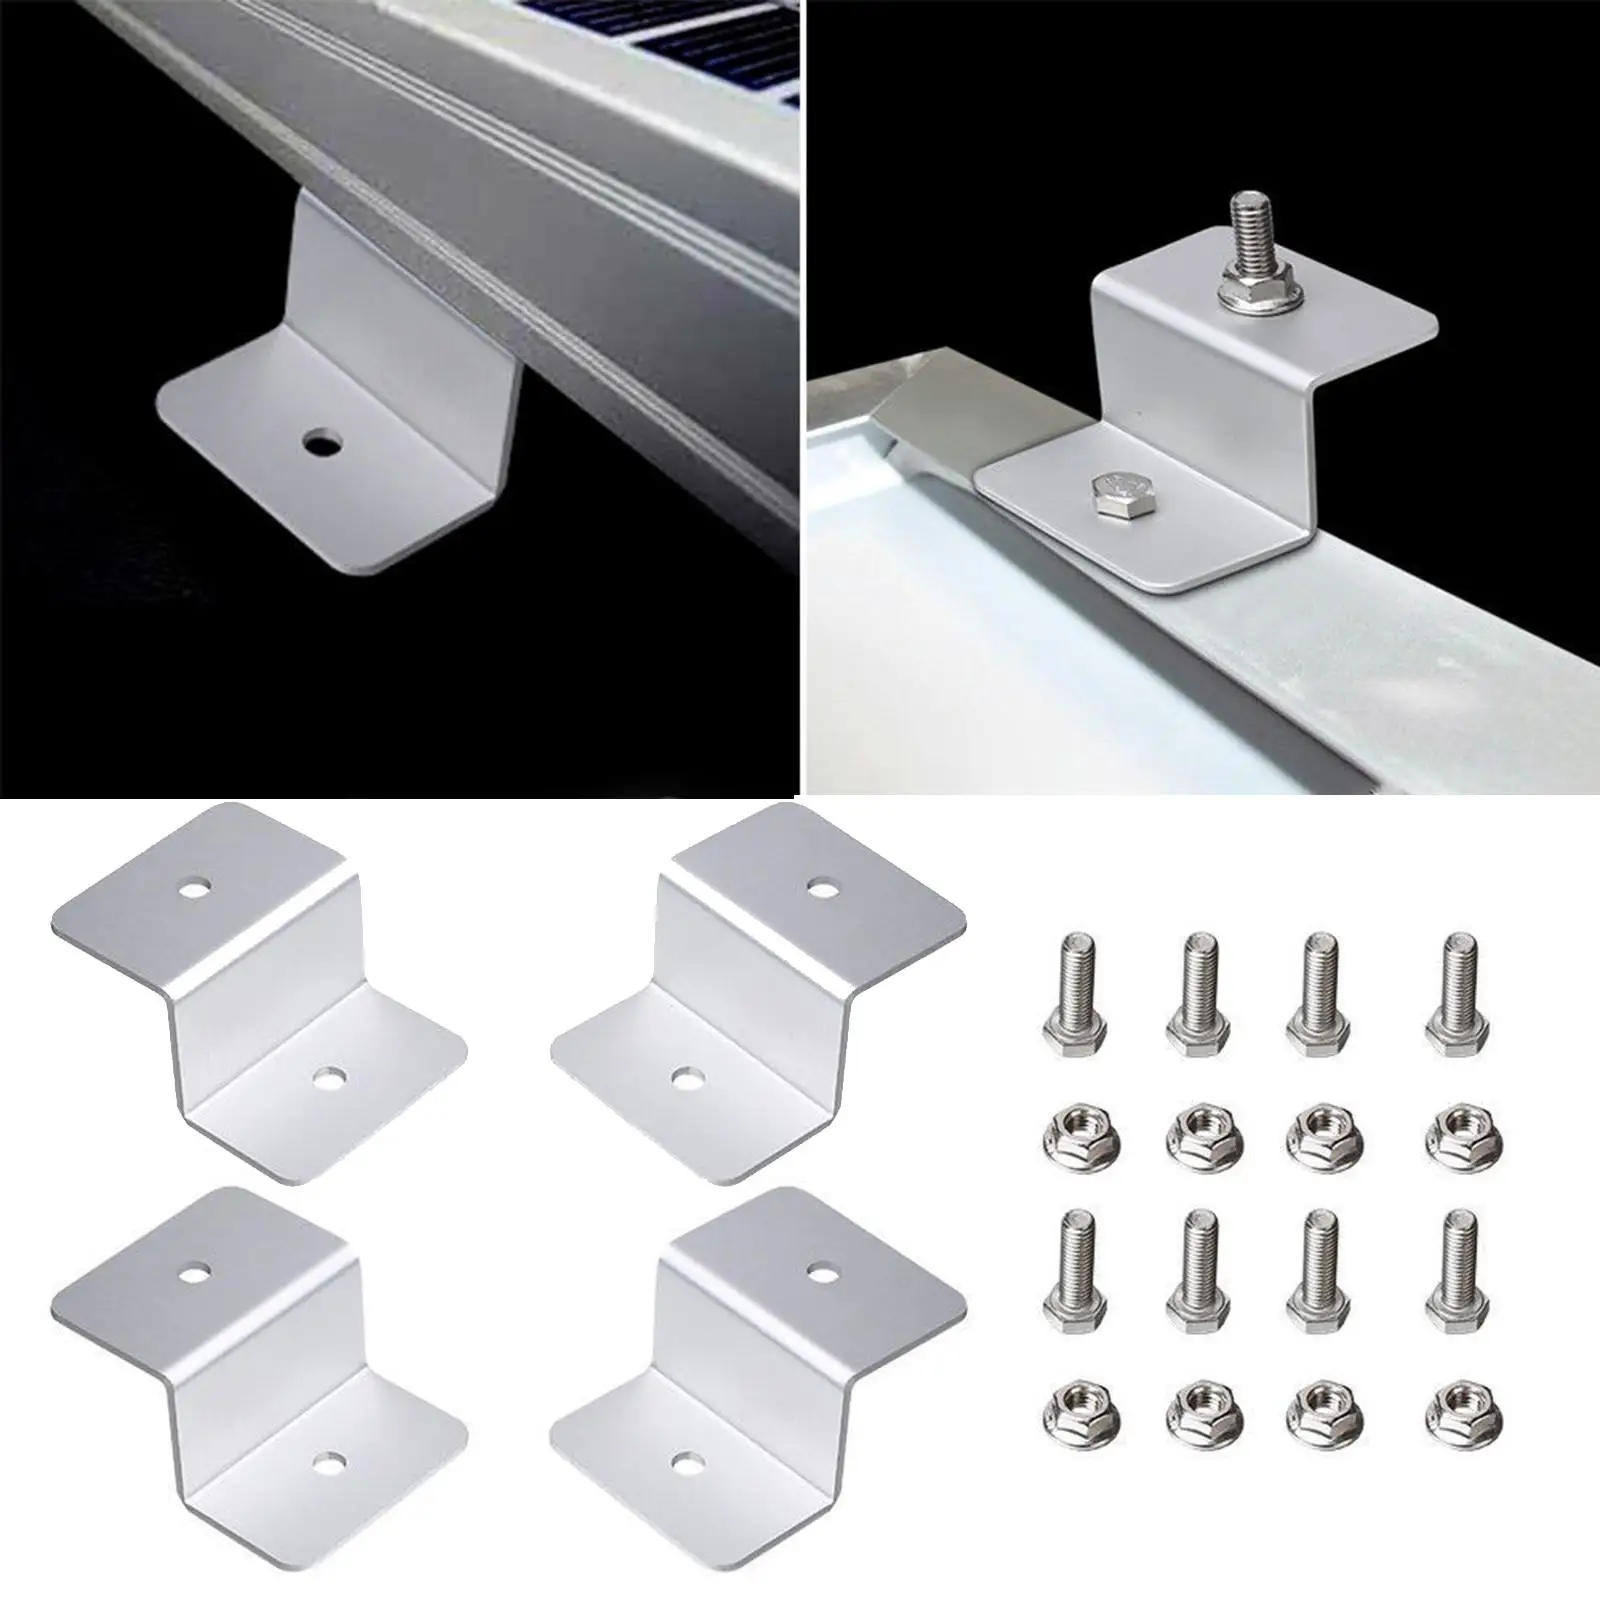 8x Aluminium Bracket for solar  Installation, Accessories Nuts Bolt Supporting Hardware for Off Grid Outdoor Motorhome Garages